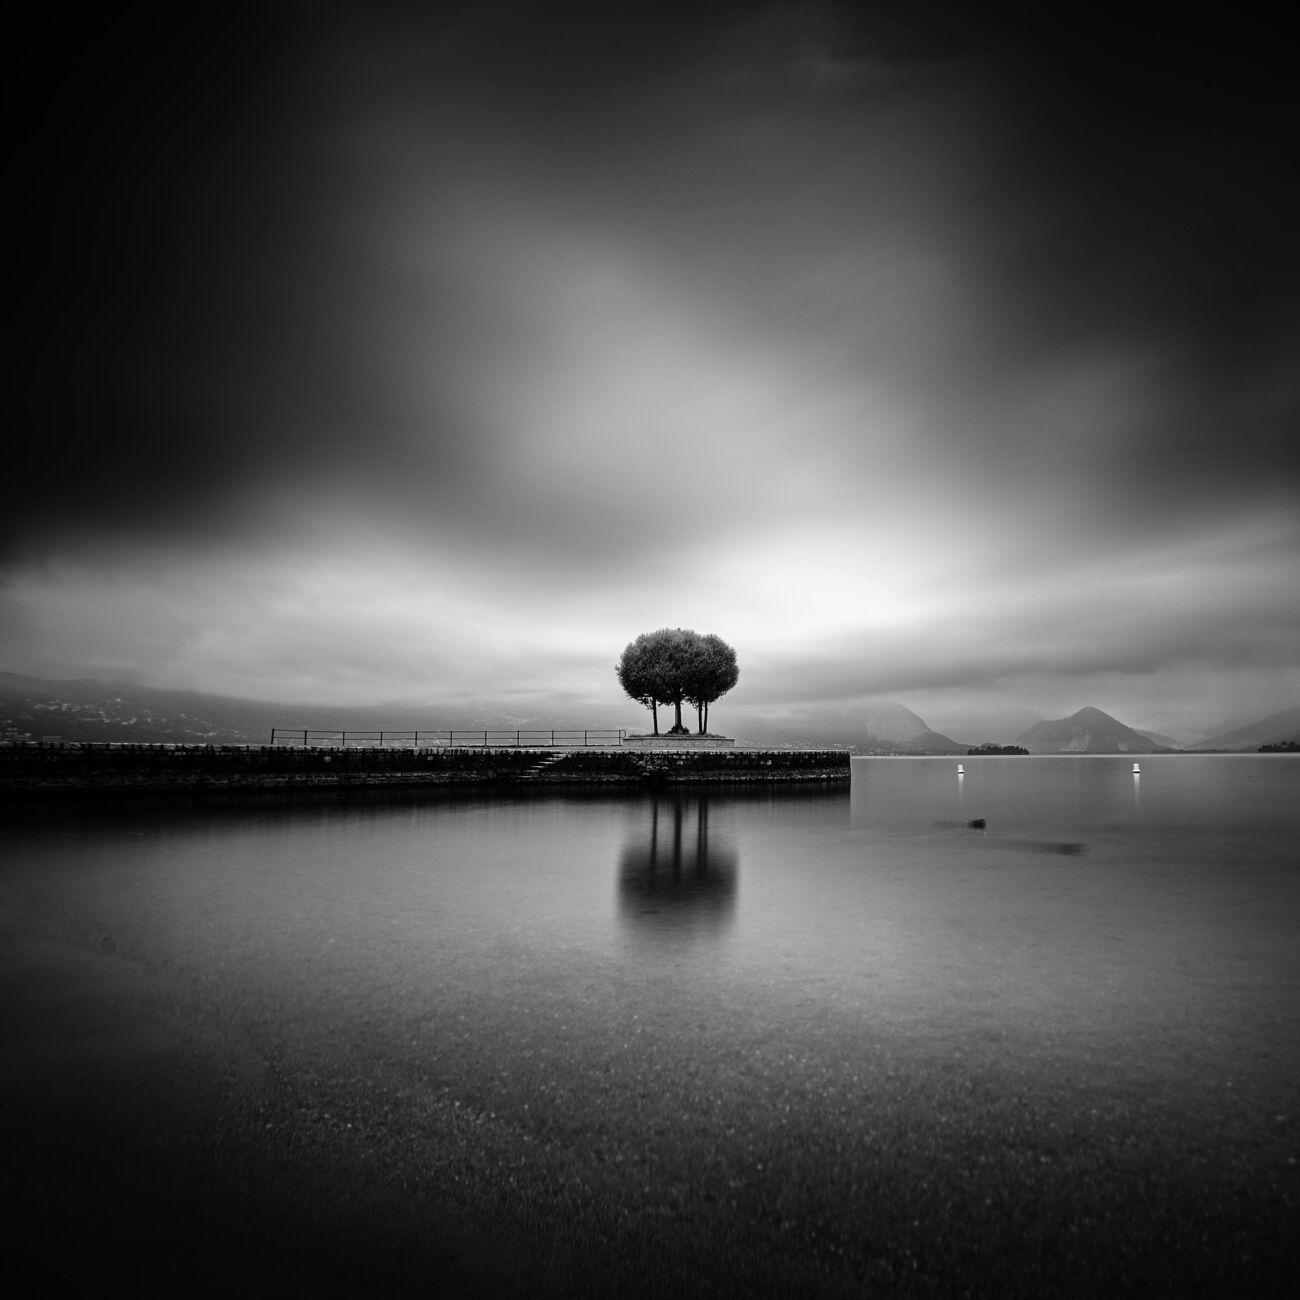 Trees On Pier, Etude 1, Lake Maggiore, Italy. August 2014. Ref-11451 - Denis Olivier Photography